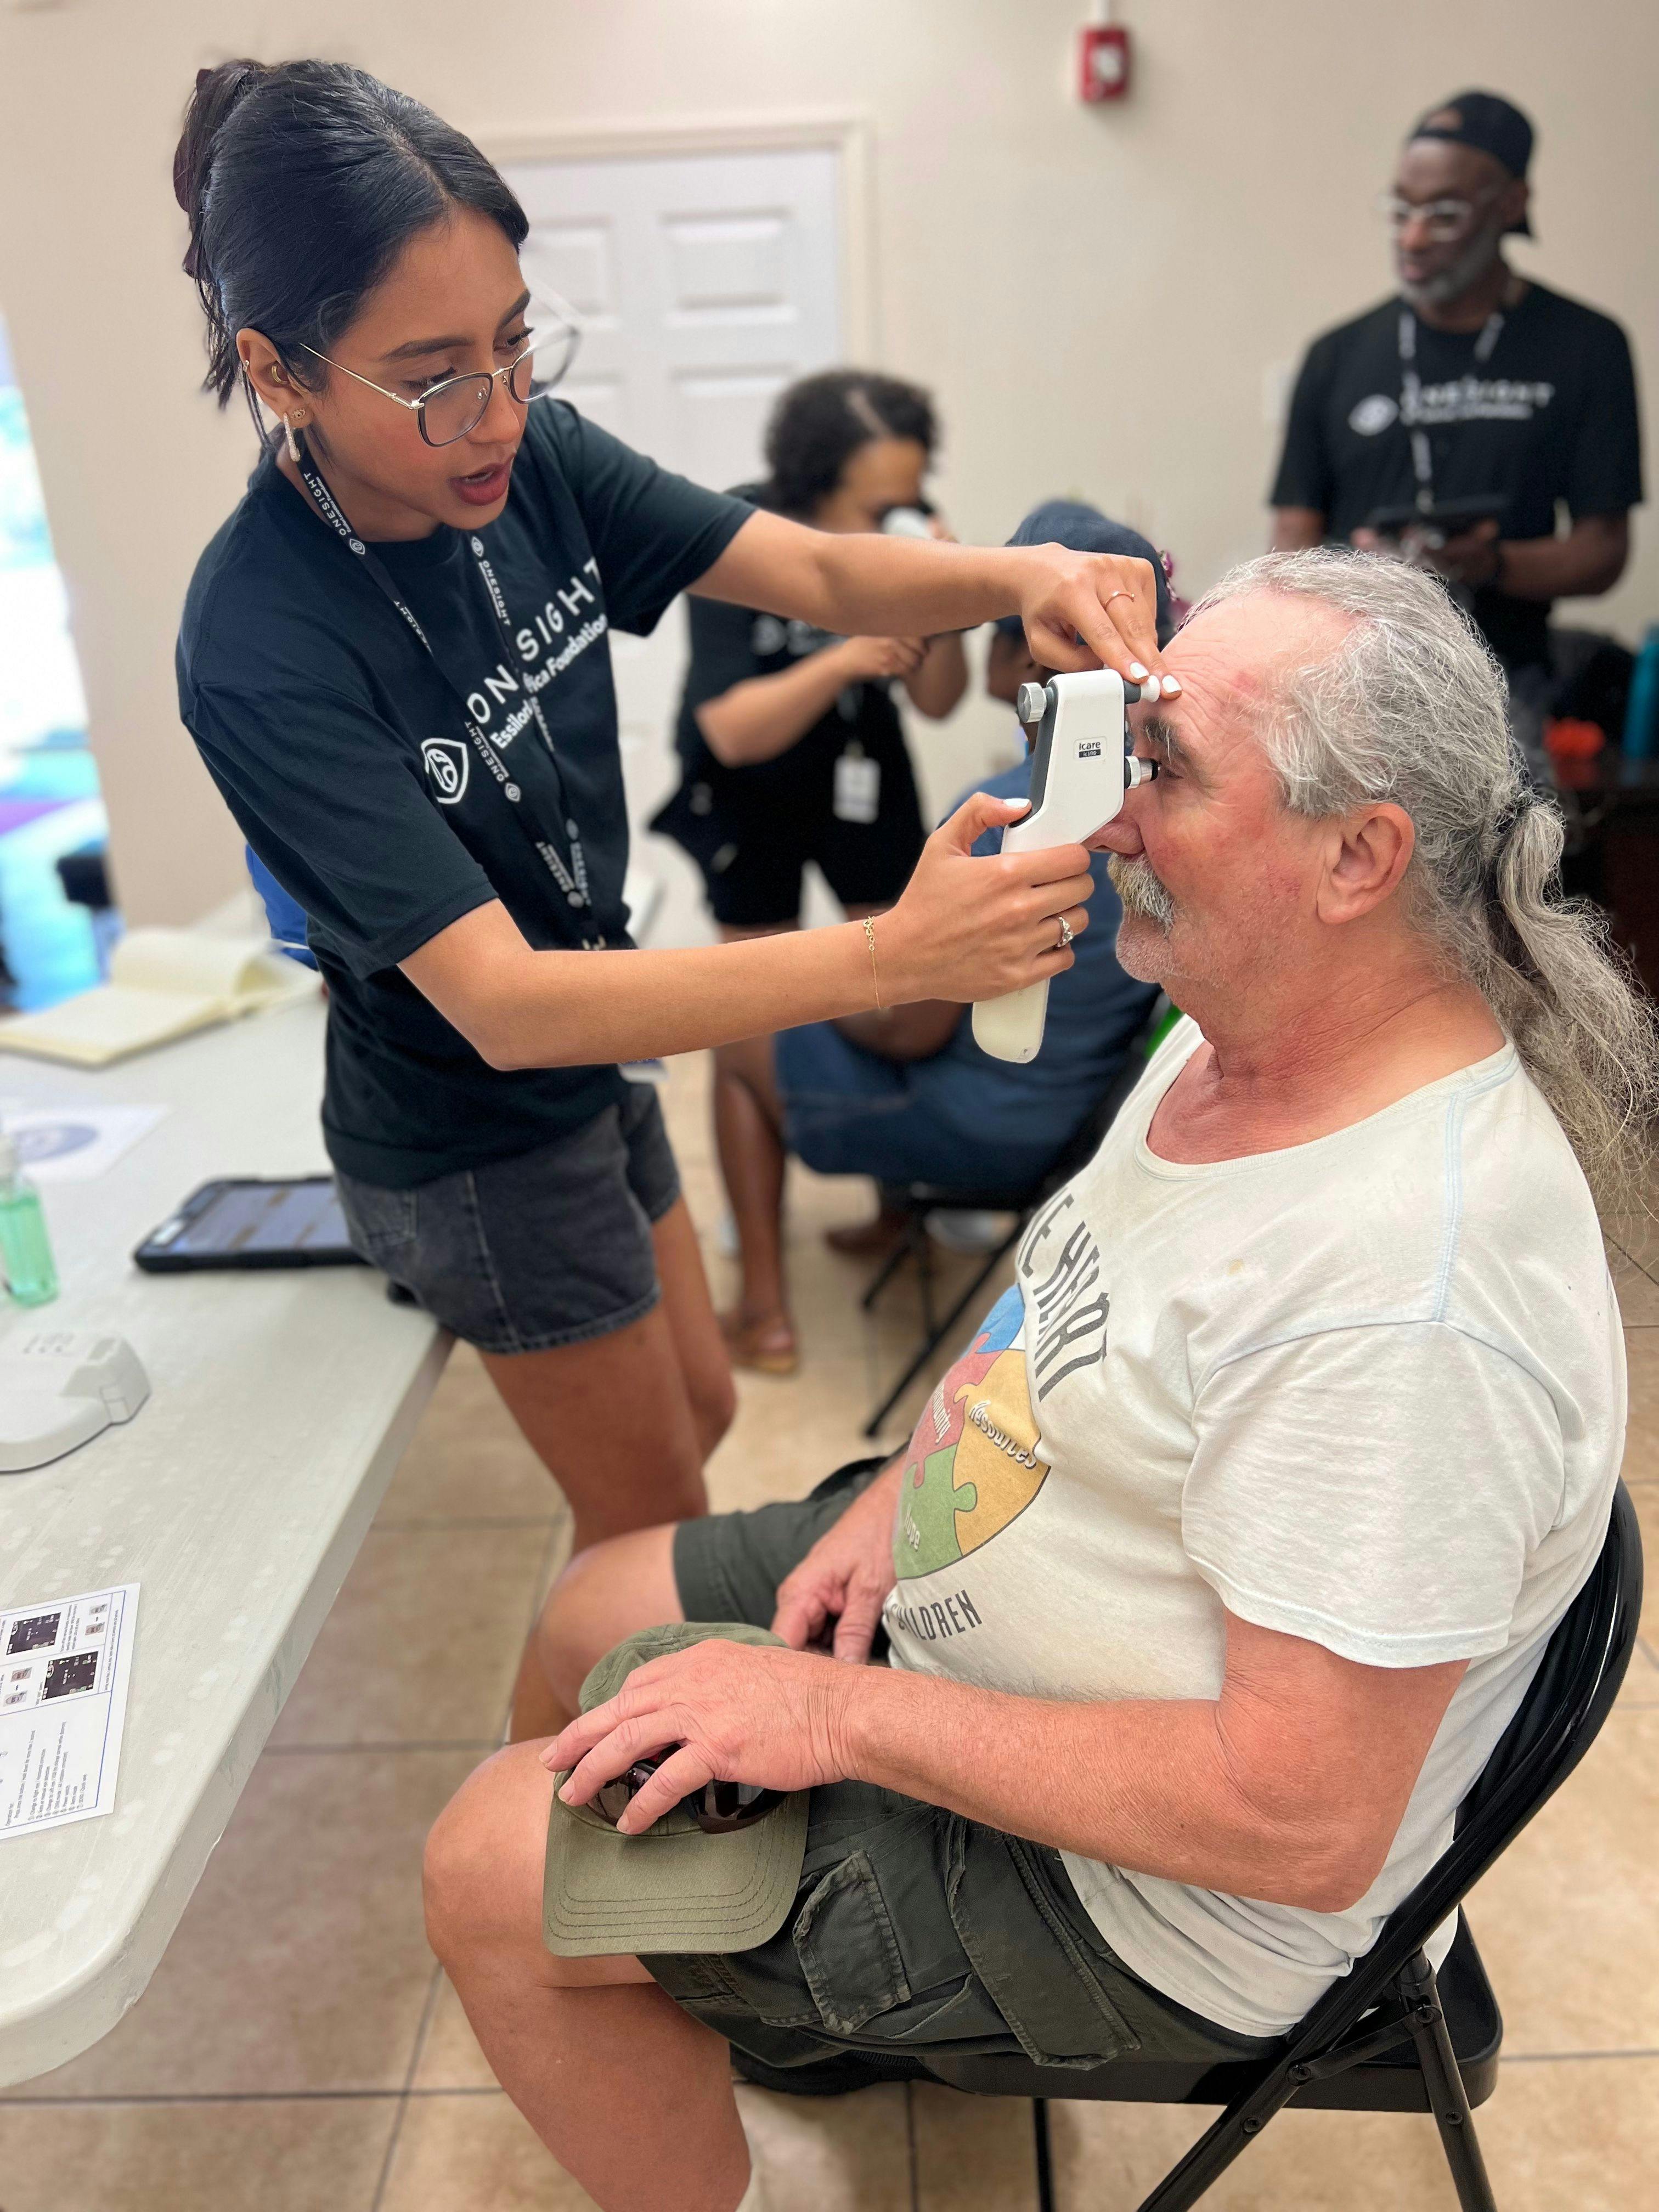 Local vision clinic provides Orlando community members with free eye health care